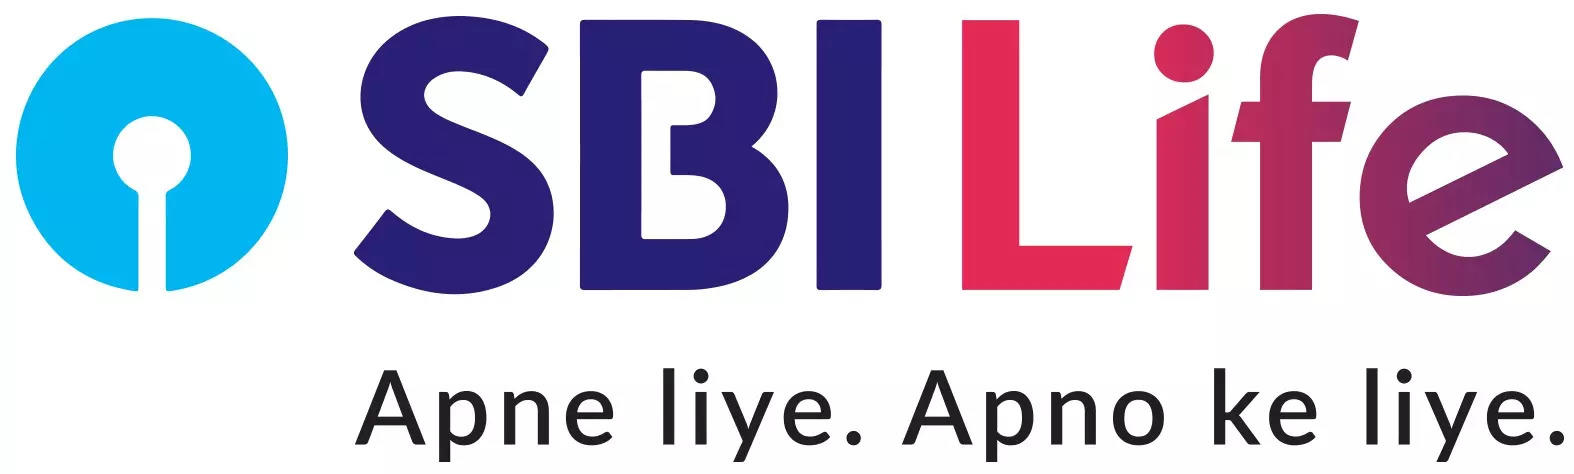 SBI Life Insurance Company Stocks Live Updates: SBI Life Insurance Closes at Rs 1427.4 with 6-Month Beta of 0.6731 